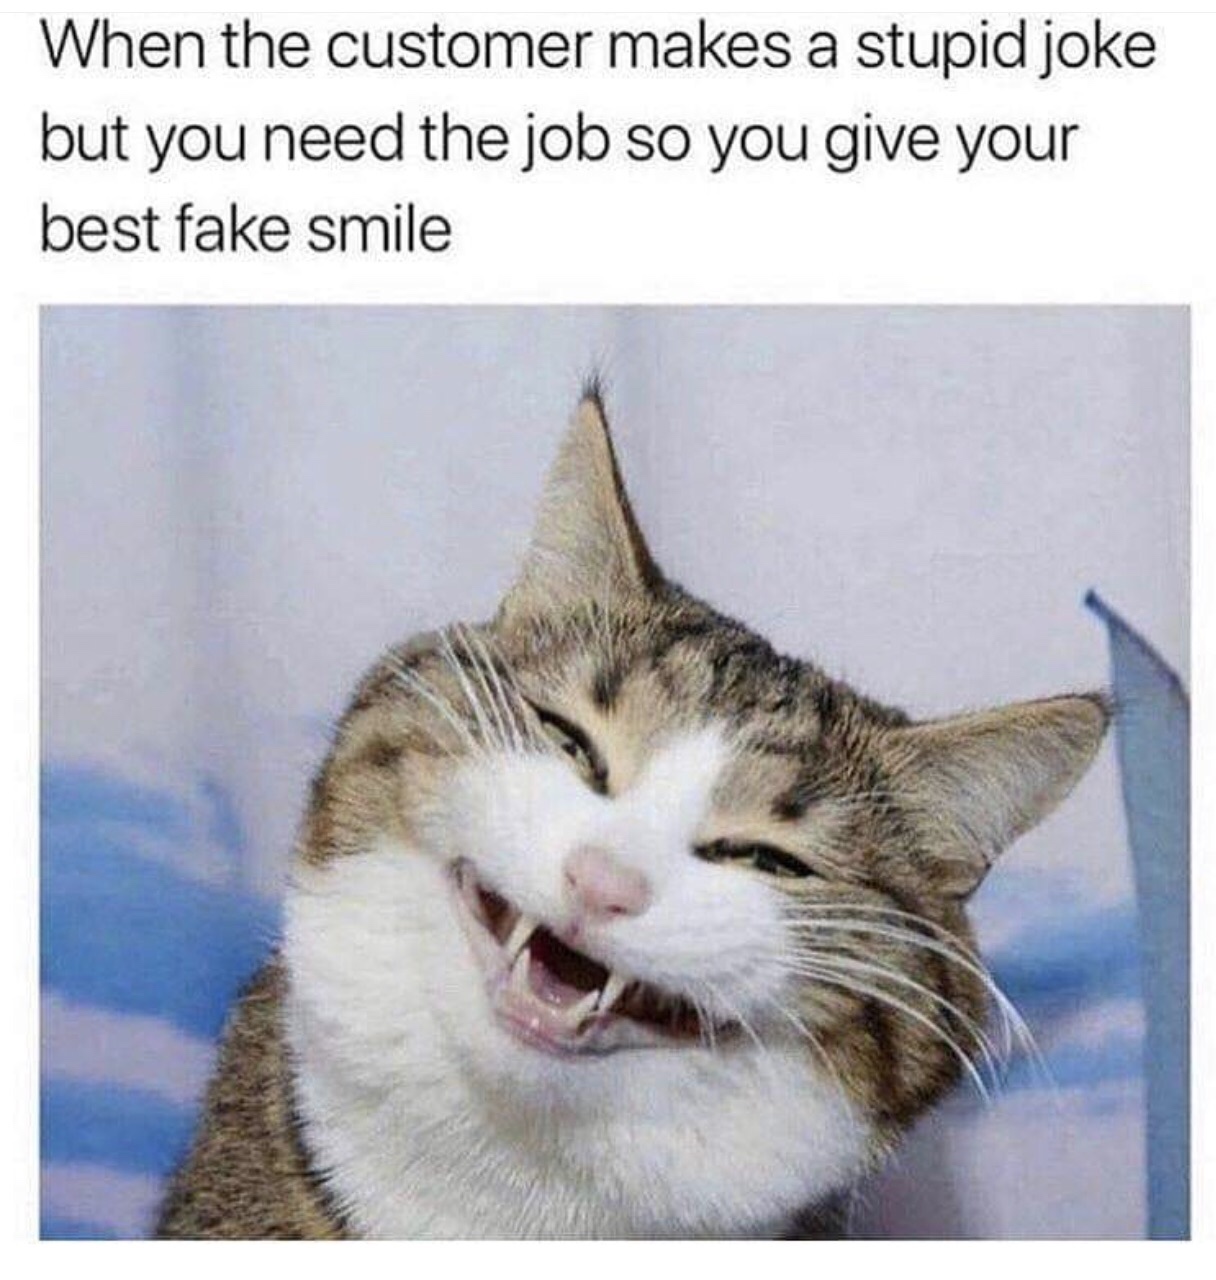 customer makes a stupid joke - When the customer makes a stupid joke but you need the job so you give your best fake smile